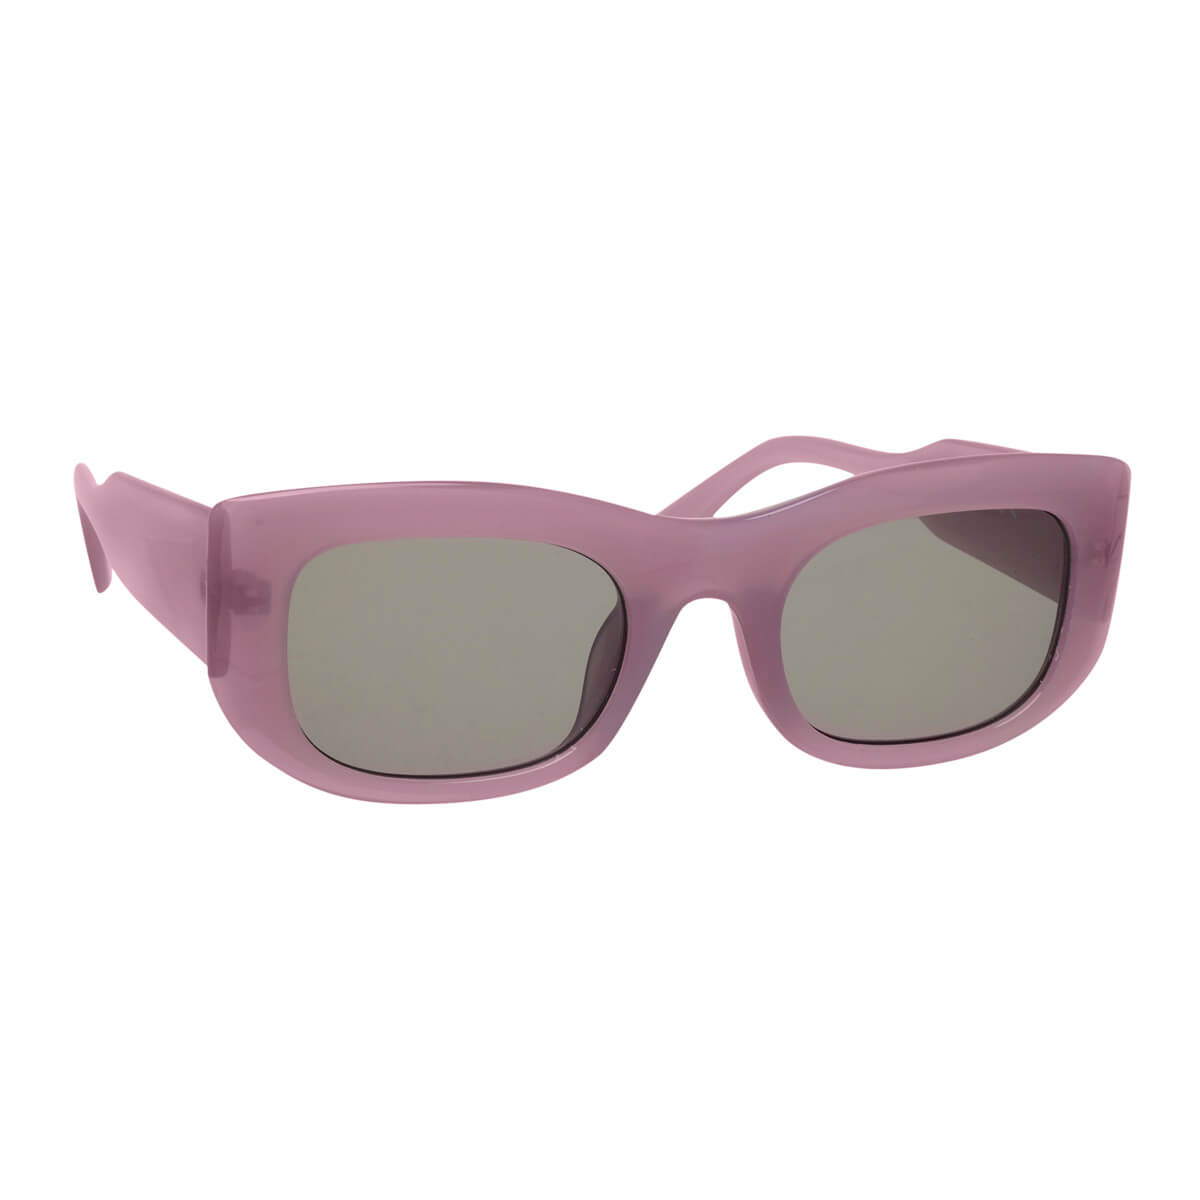 Angled sunglasses with thick frames